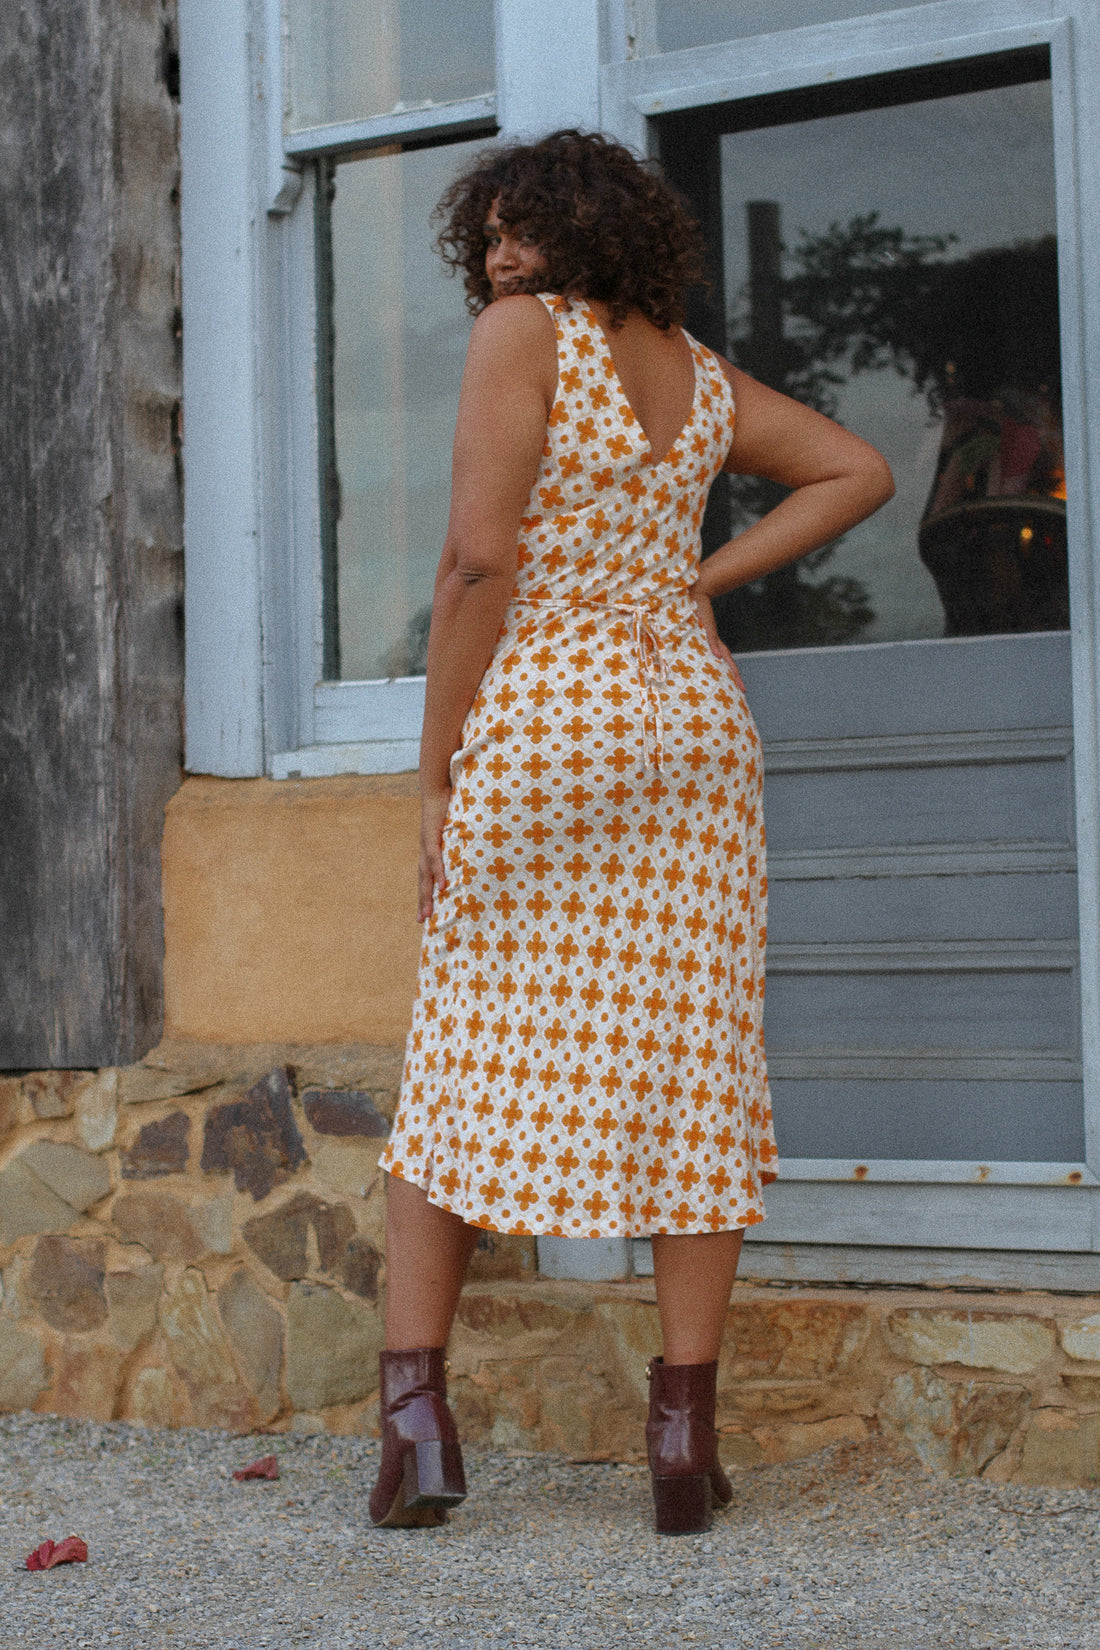 sustainable aussie fashion label Arlo and Olive producing 70's printed midi dress.